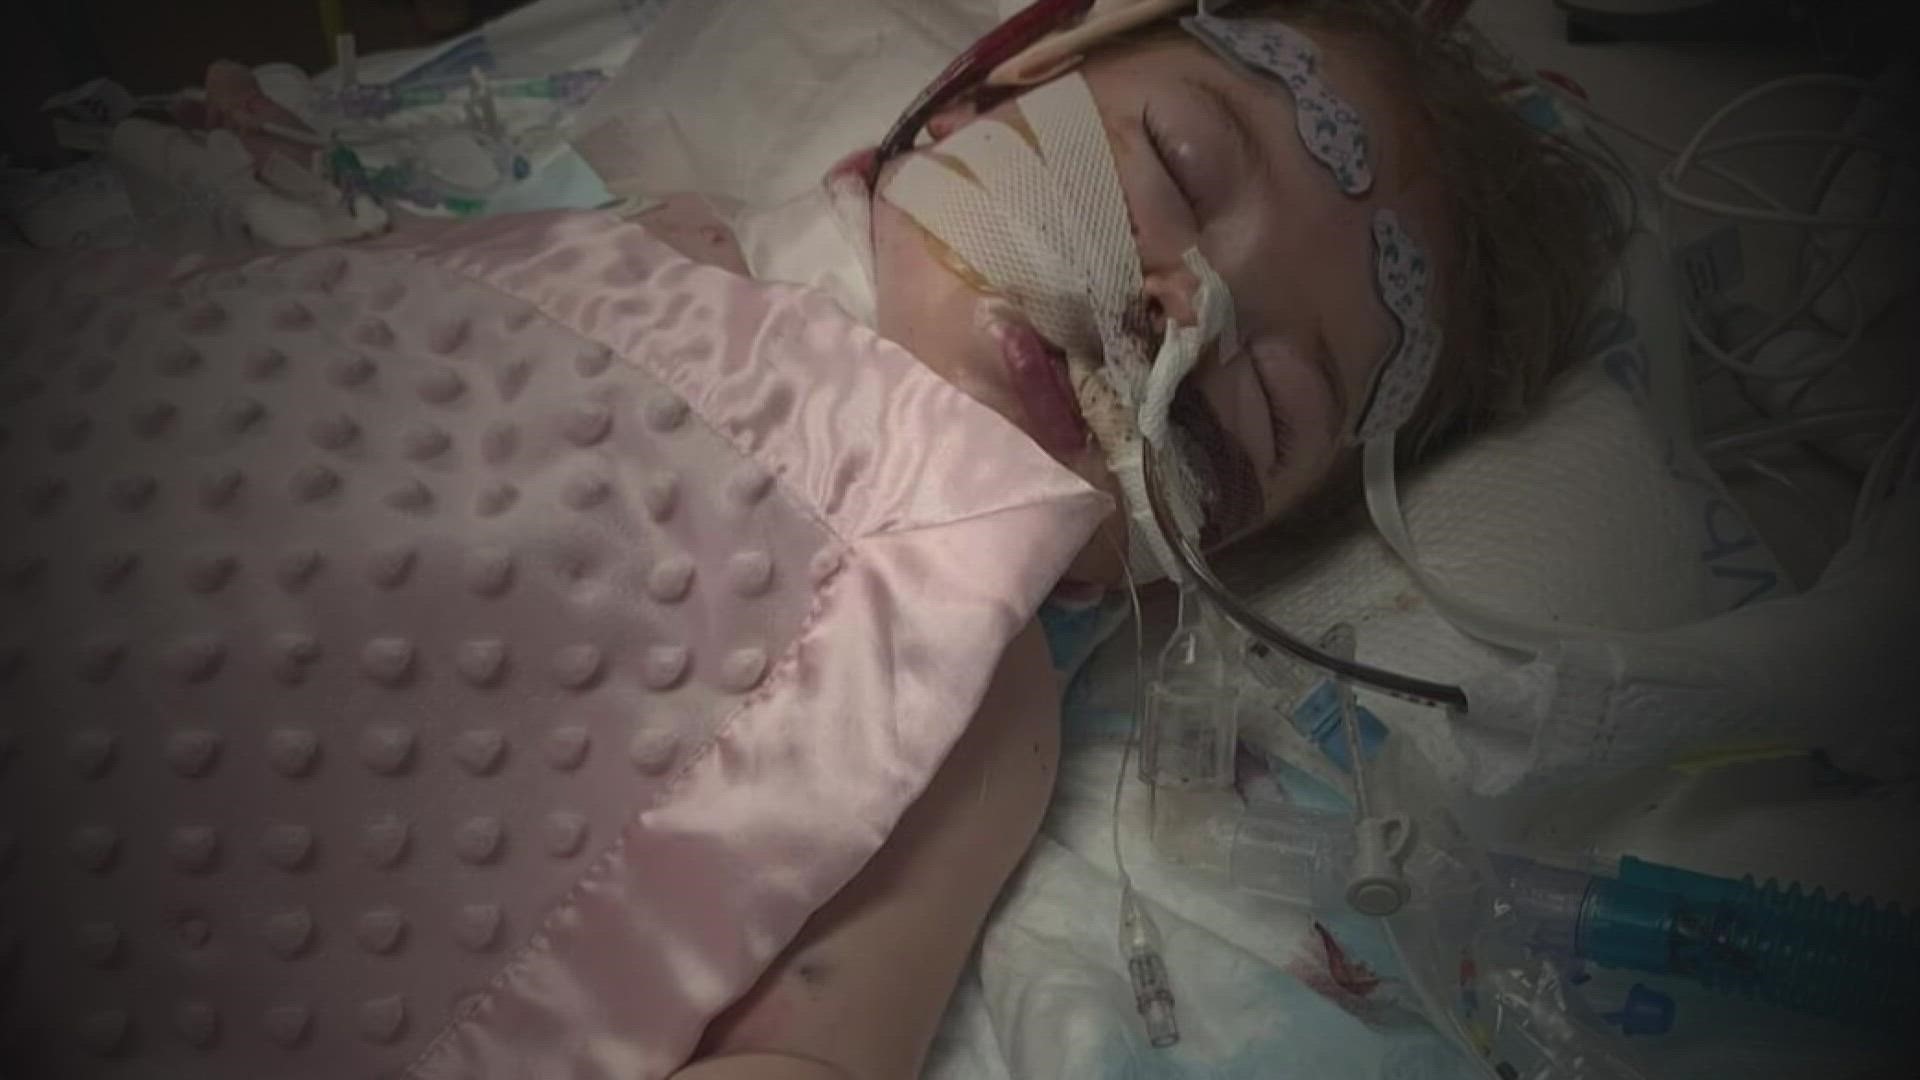 Scarlett Wood, who has been hospitalized for two weeks, has been fighting for her life.